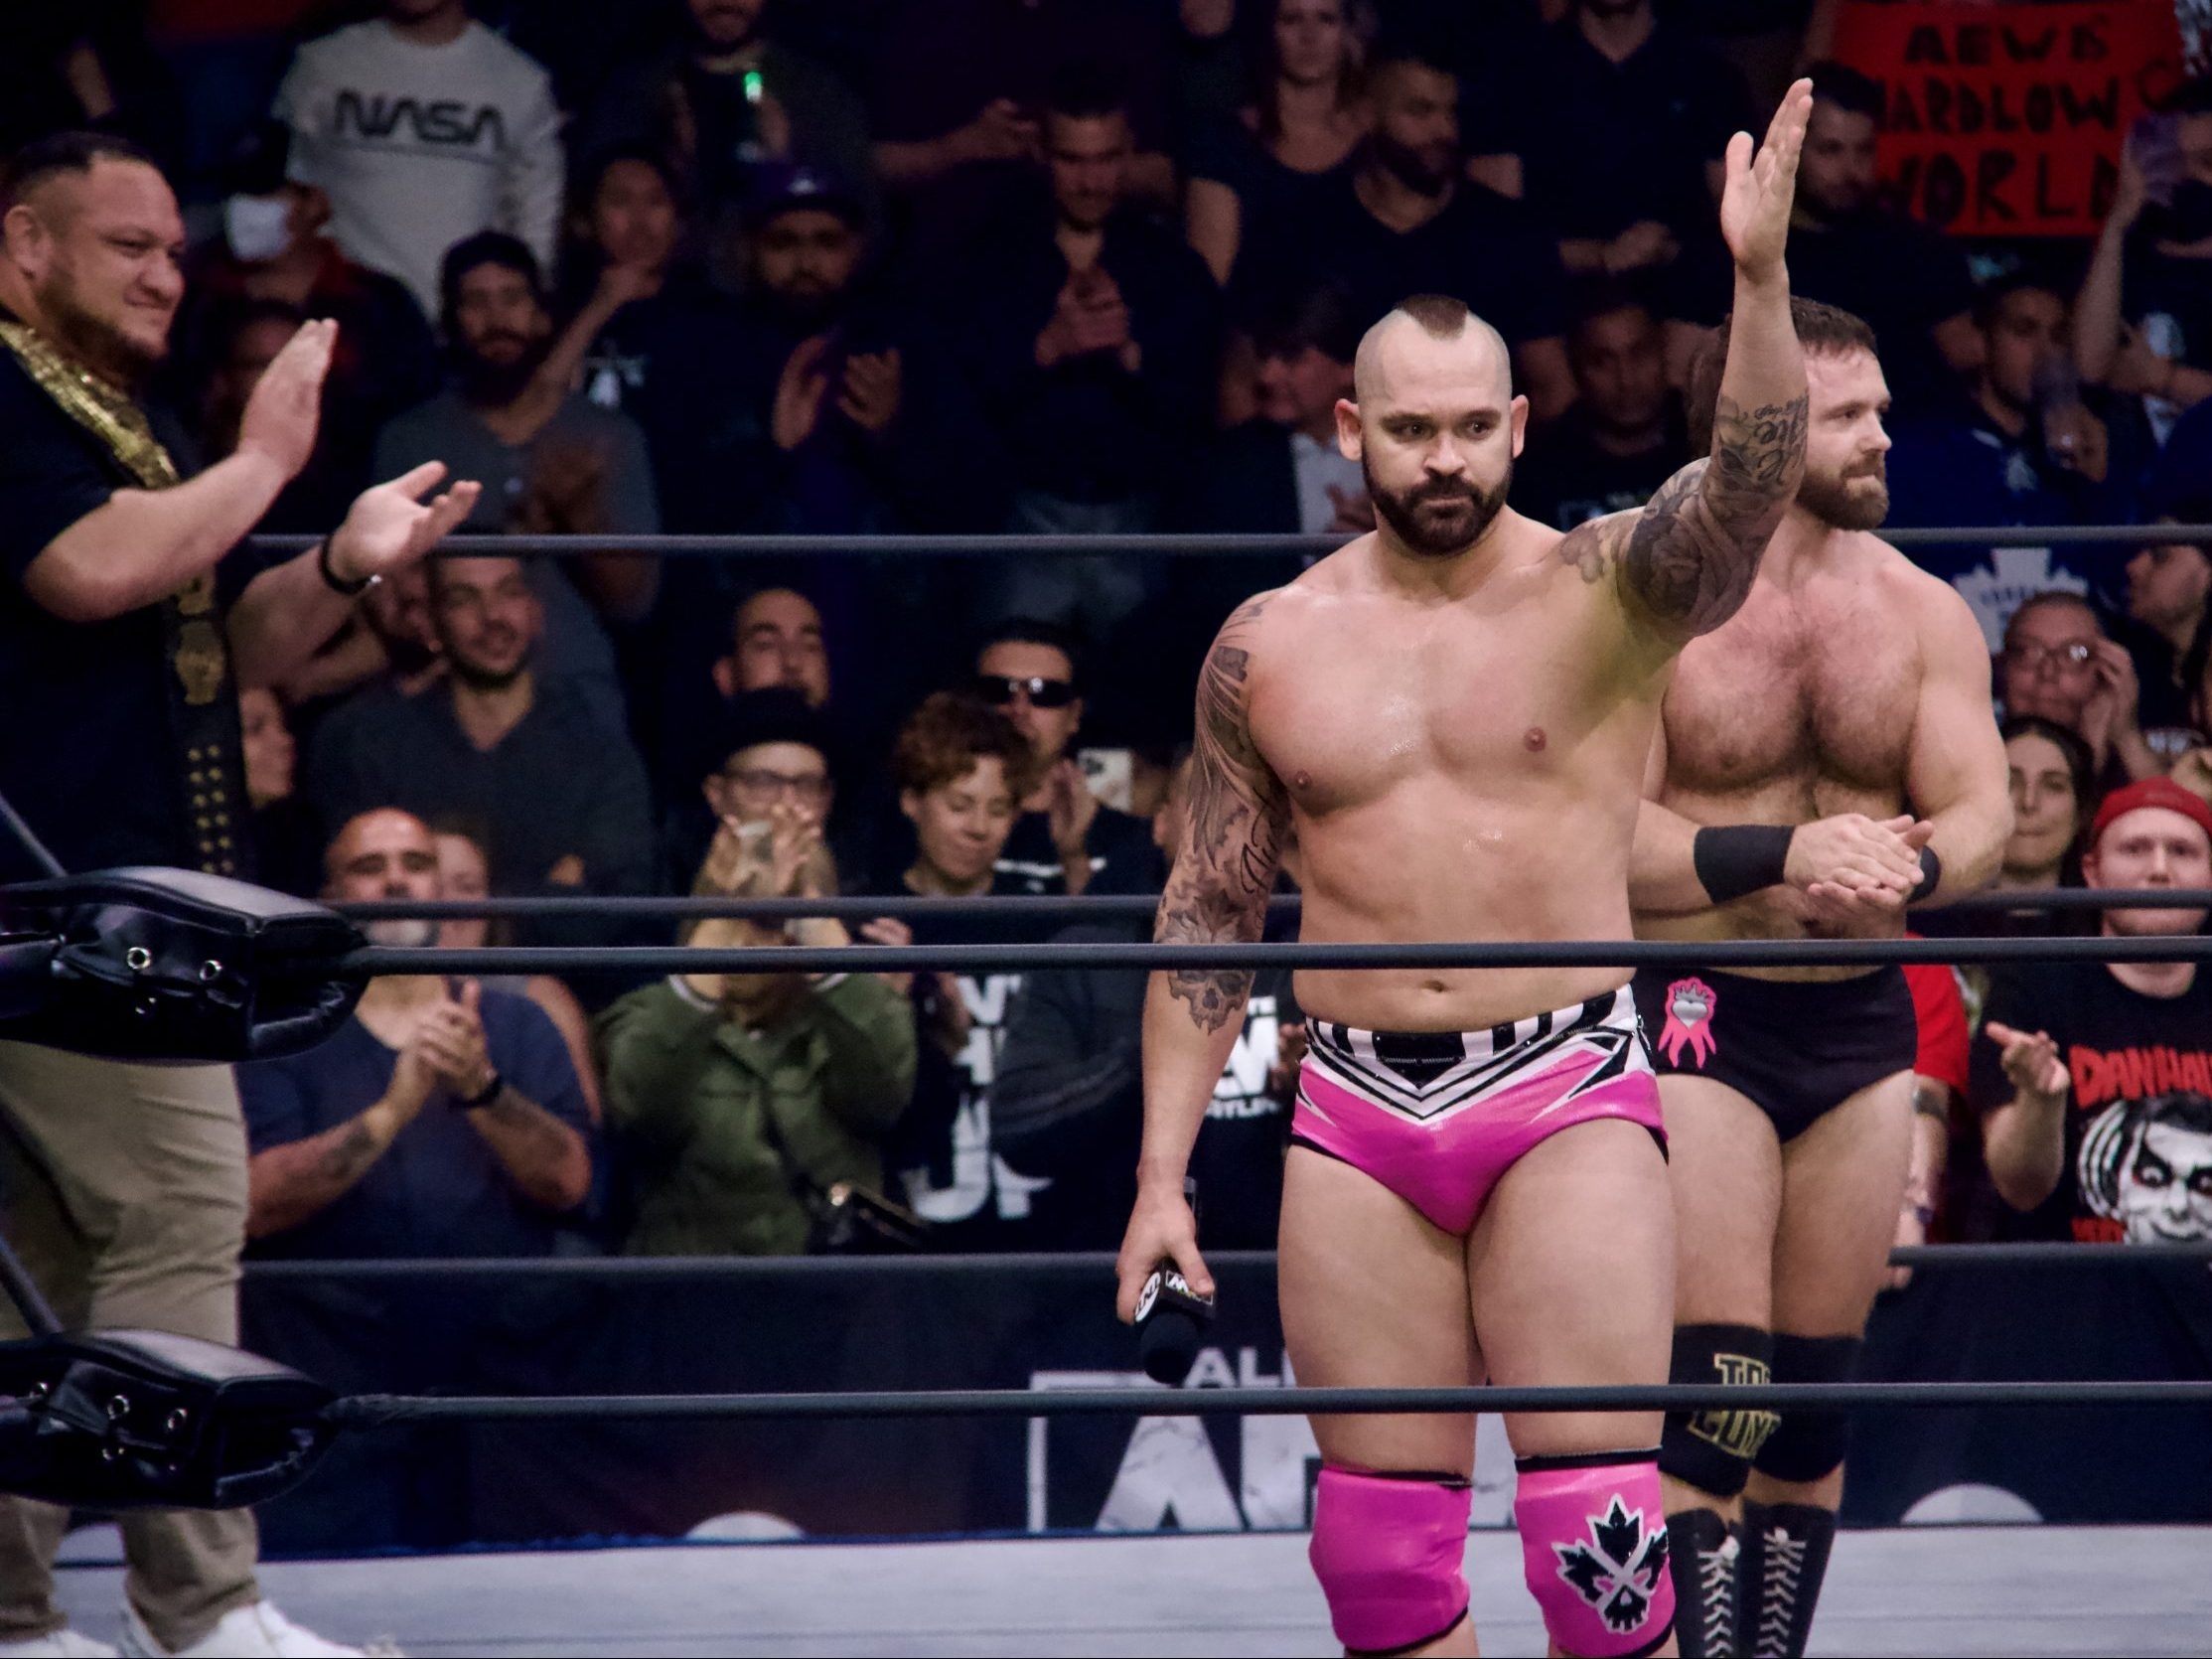 AEW's Shawn Spears relishes home return for series of shows